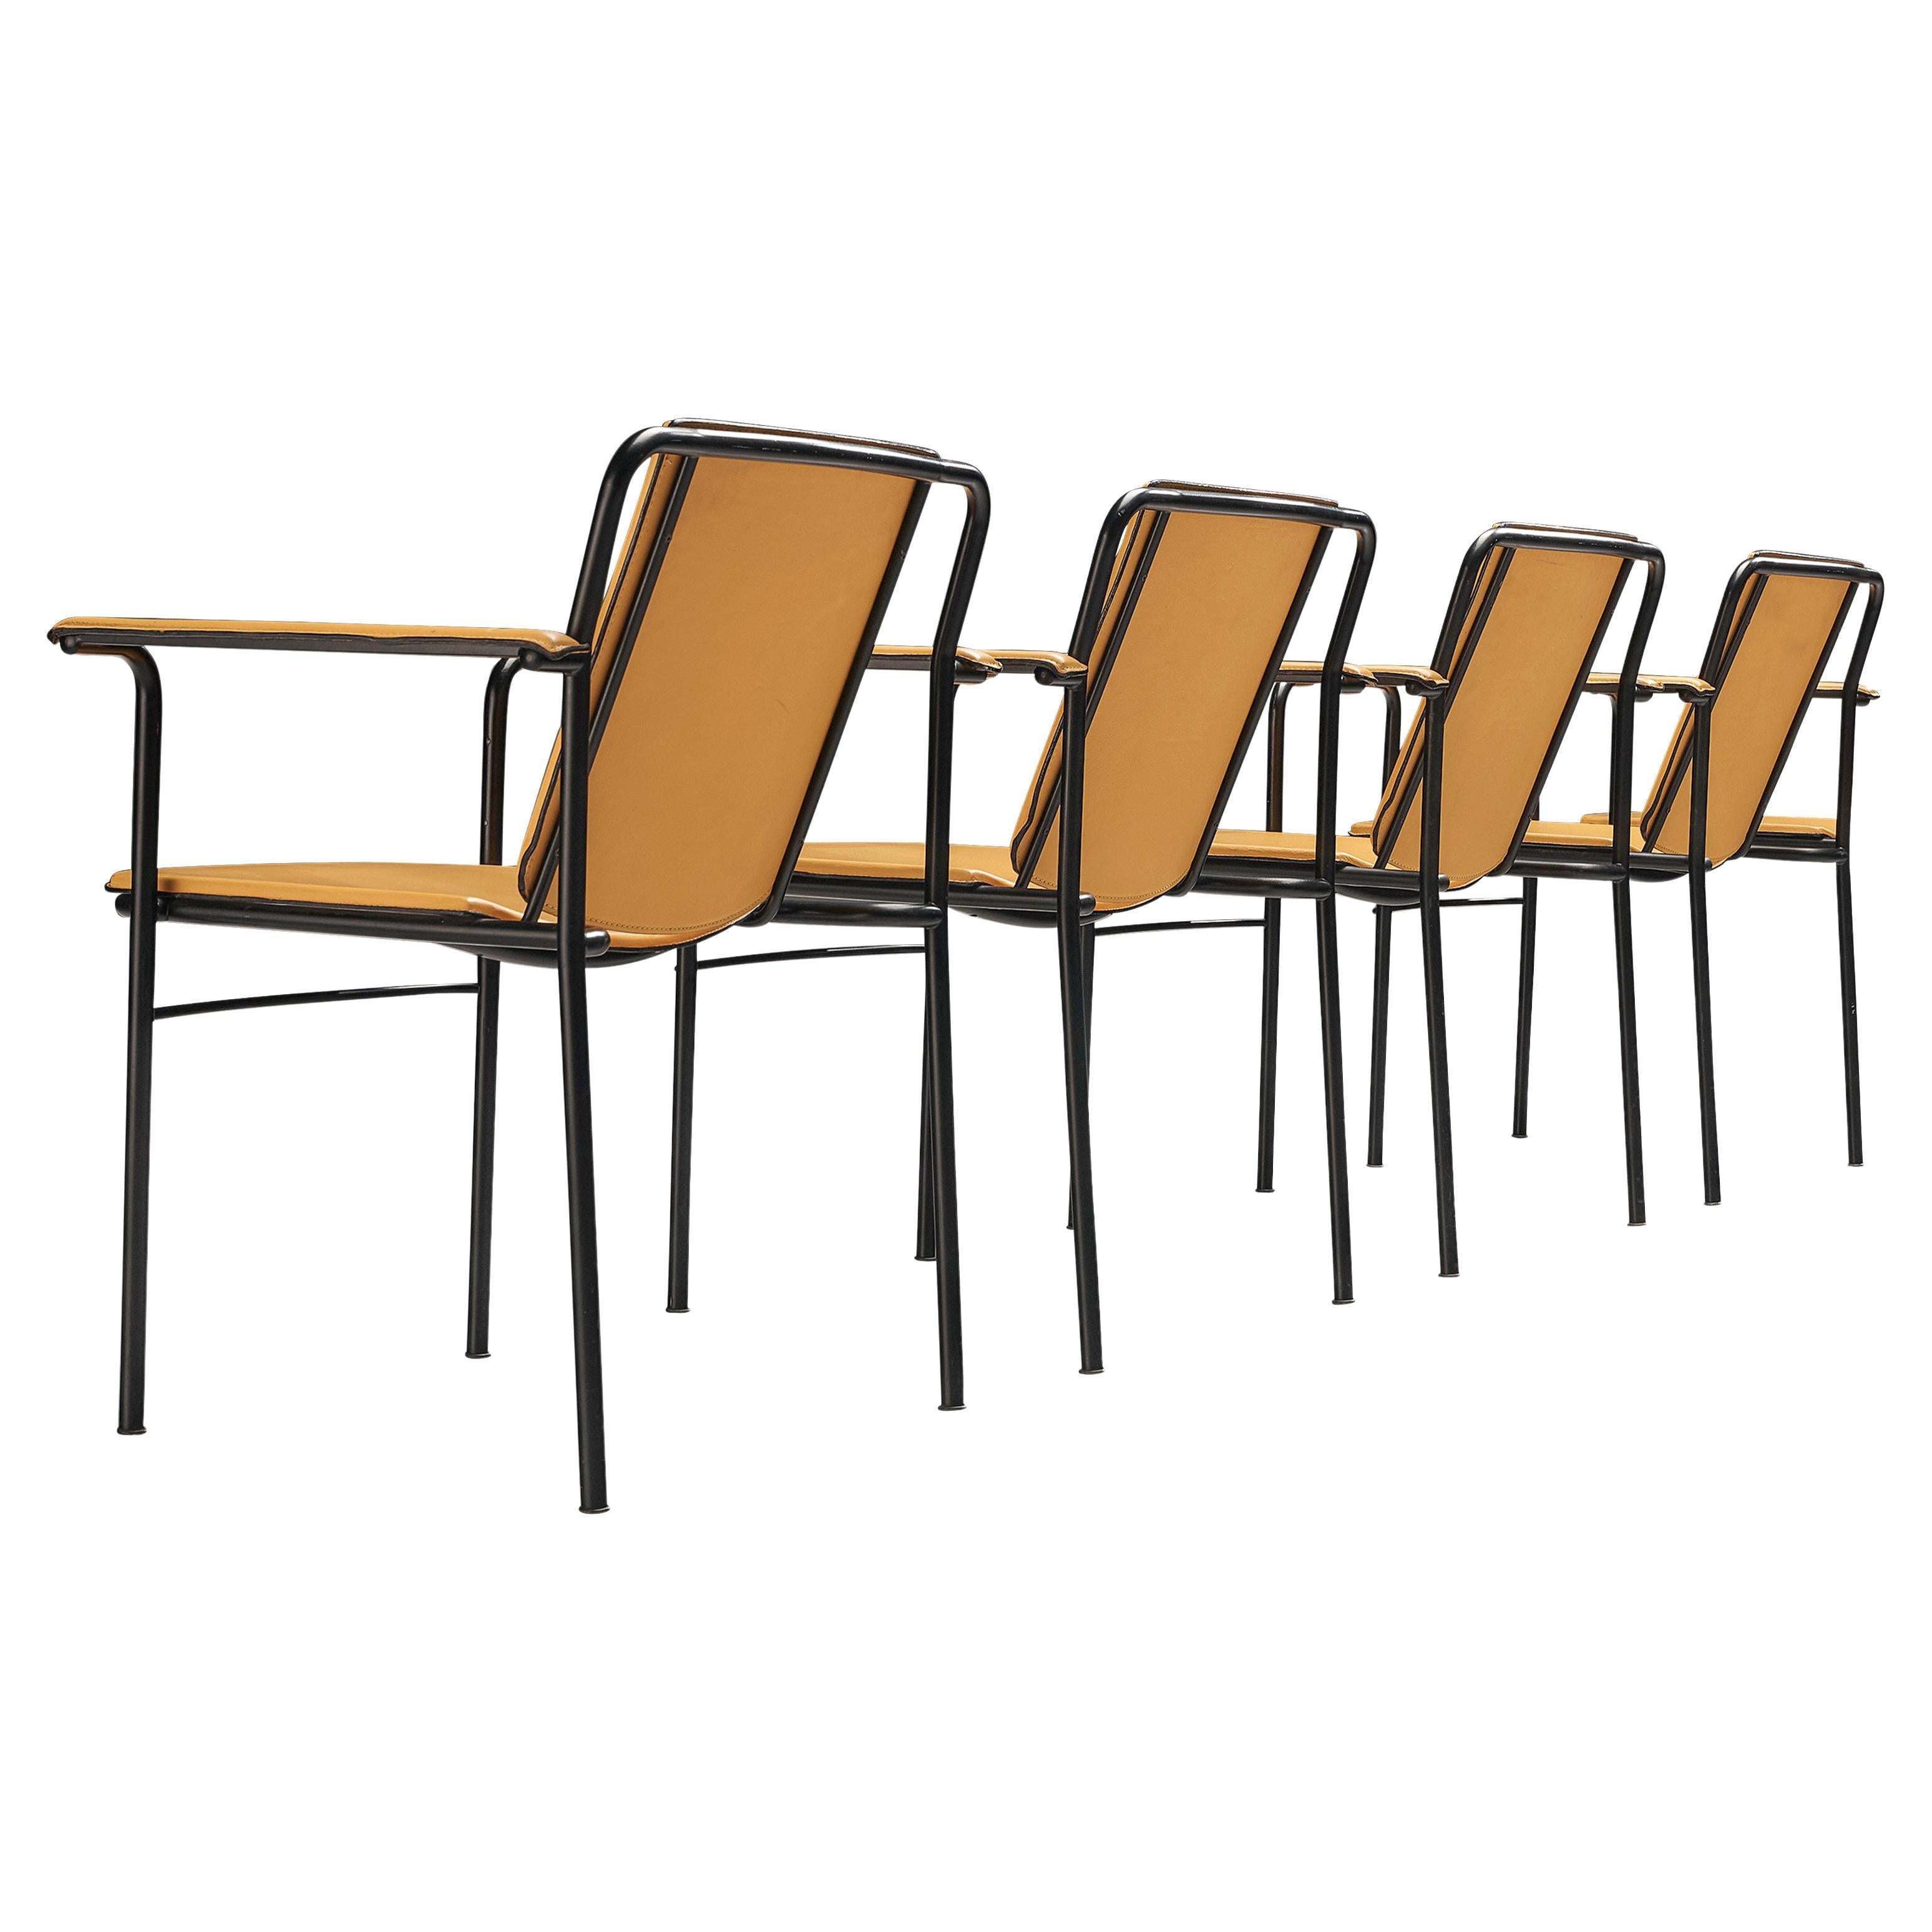 Mario Marenco for Poltrona Frau Yellow ‘Movie’ Armchairs in Leather and Metal